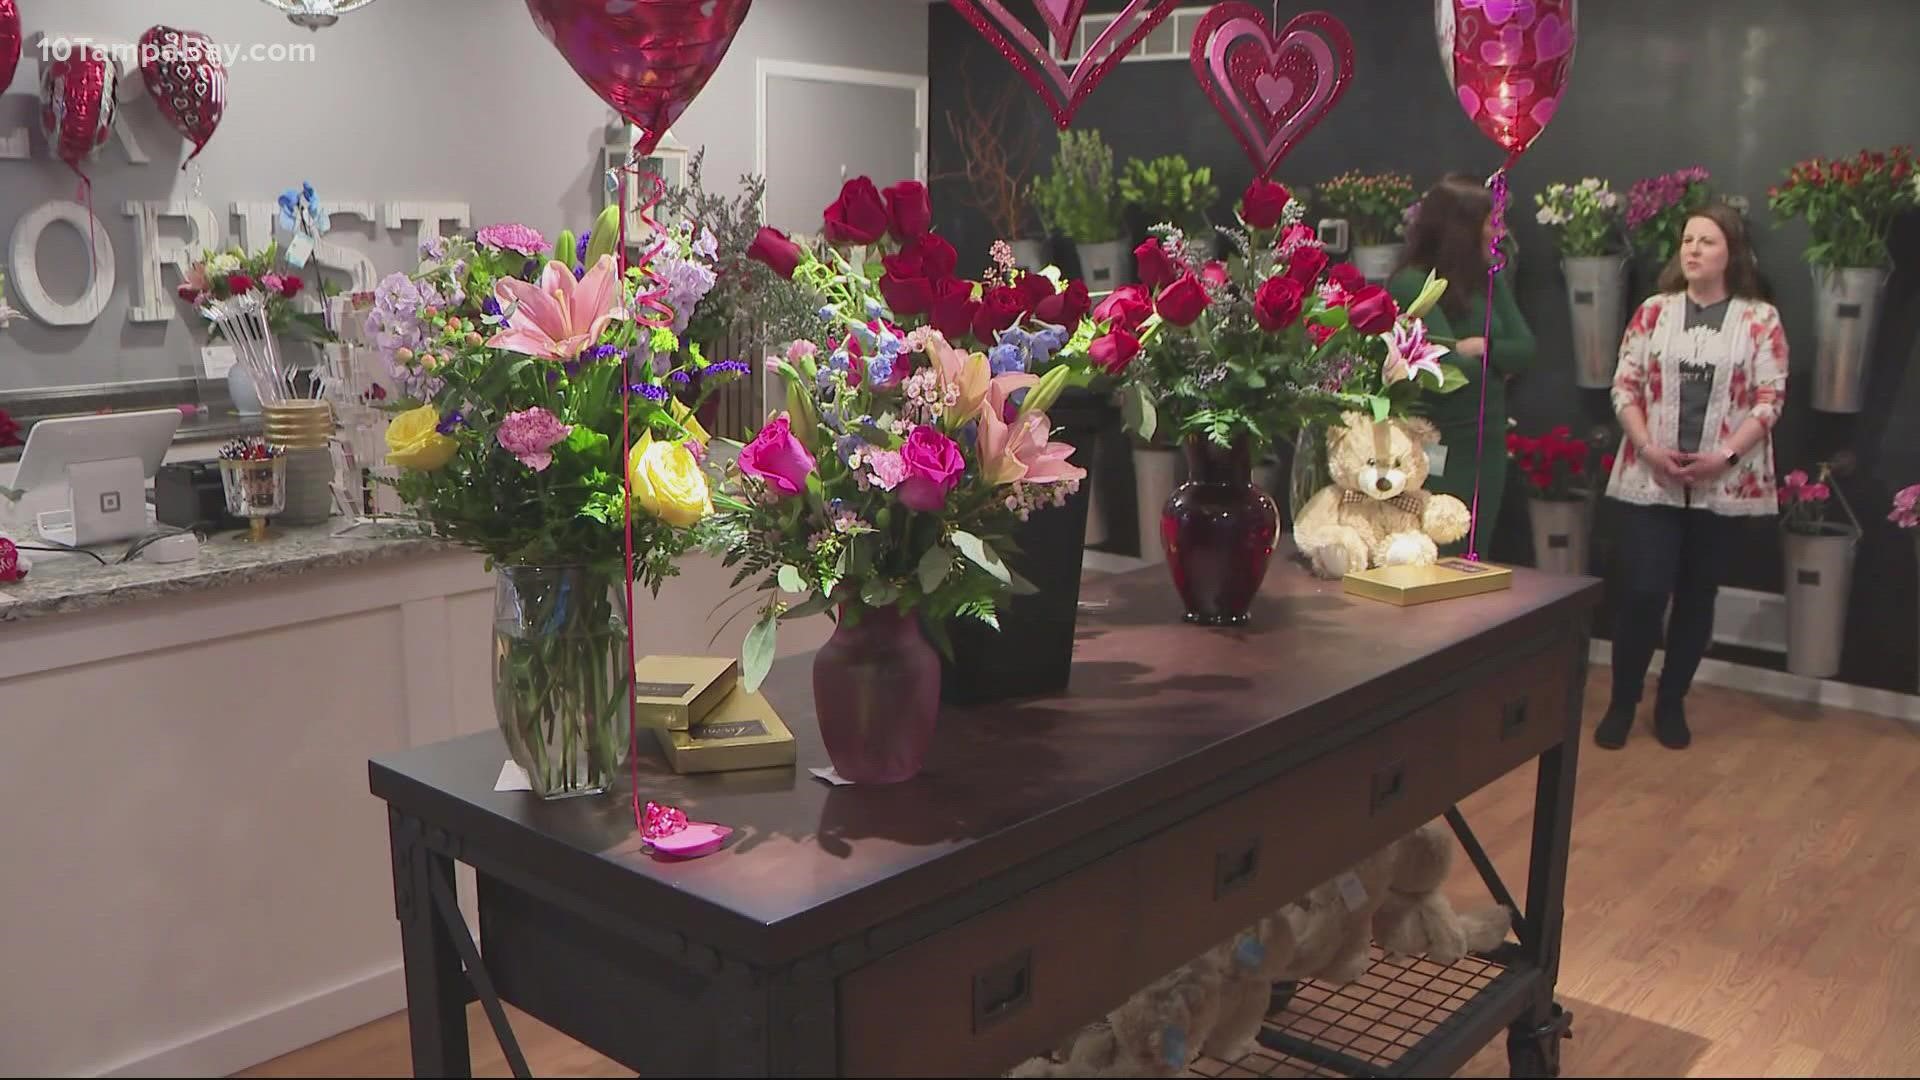 Valentine's Day is all about love but it can be tough for some couples and experts say it's a great time to consider reaching out for help.